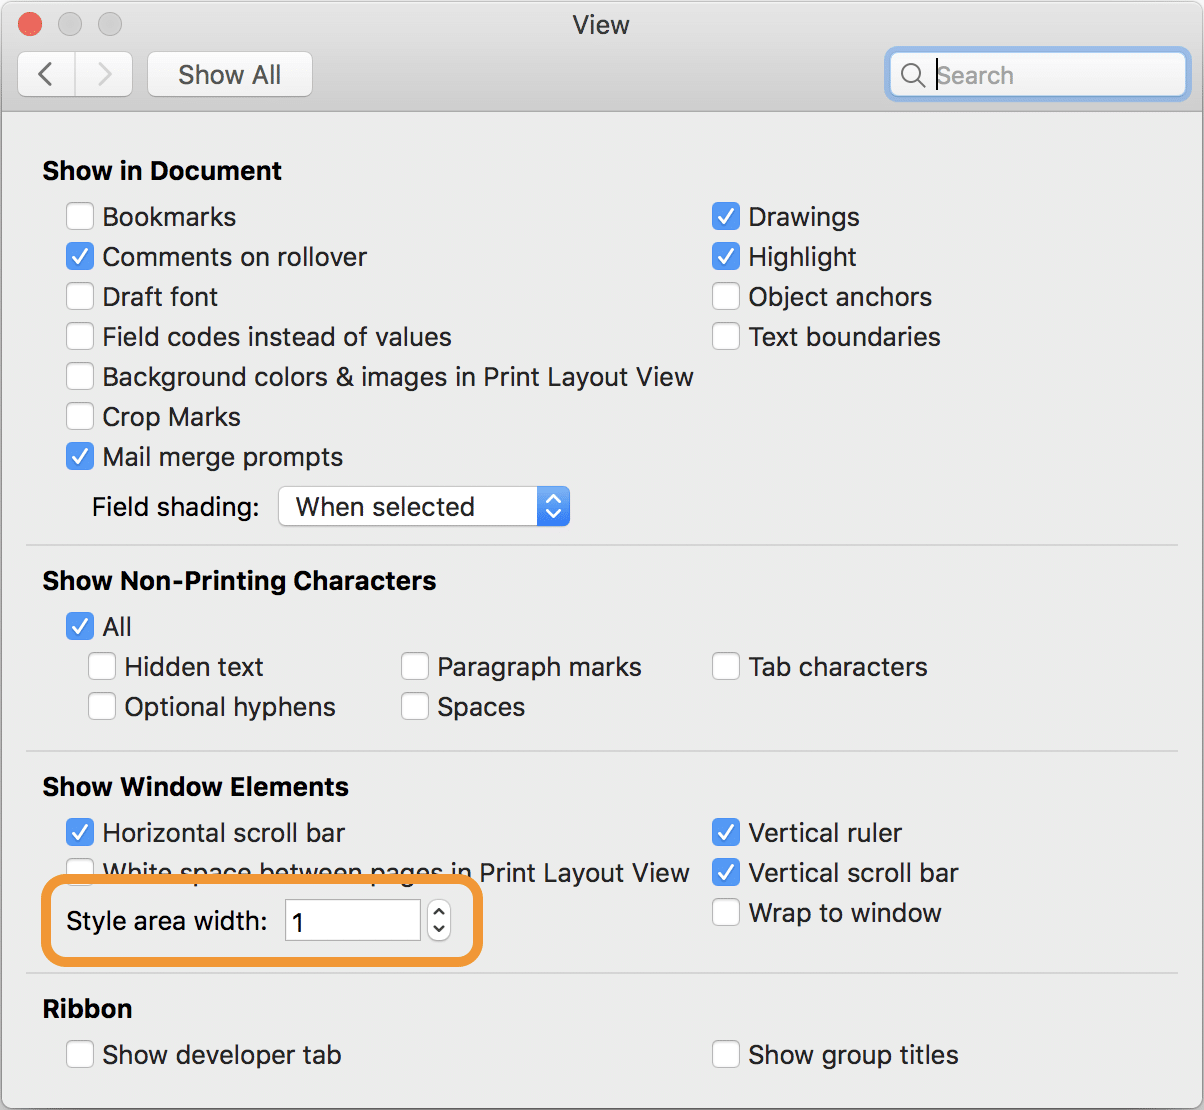 Screenshot of Word's View preferences (Mac) showing the location of the 'Style area width' option.